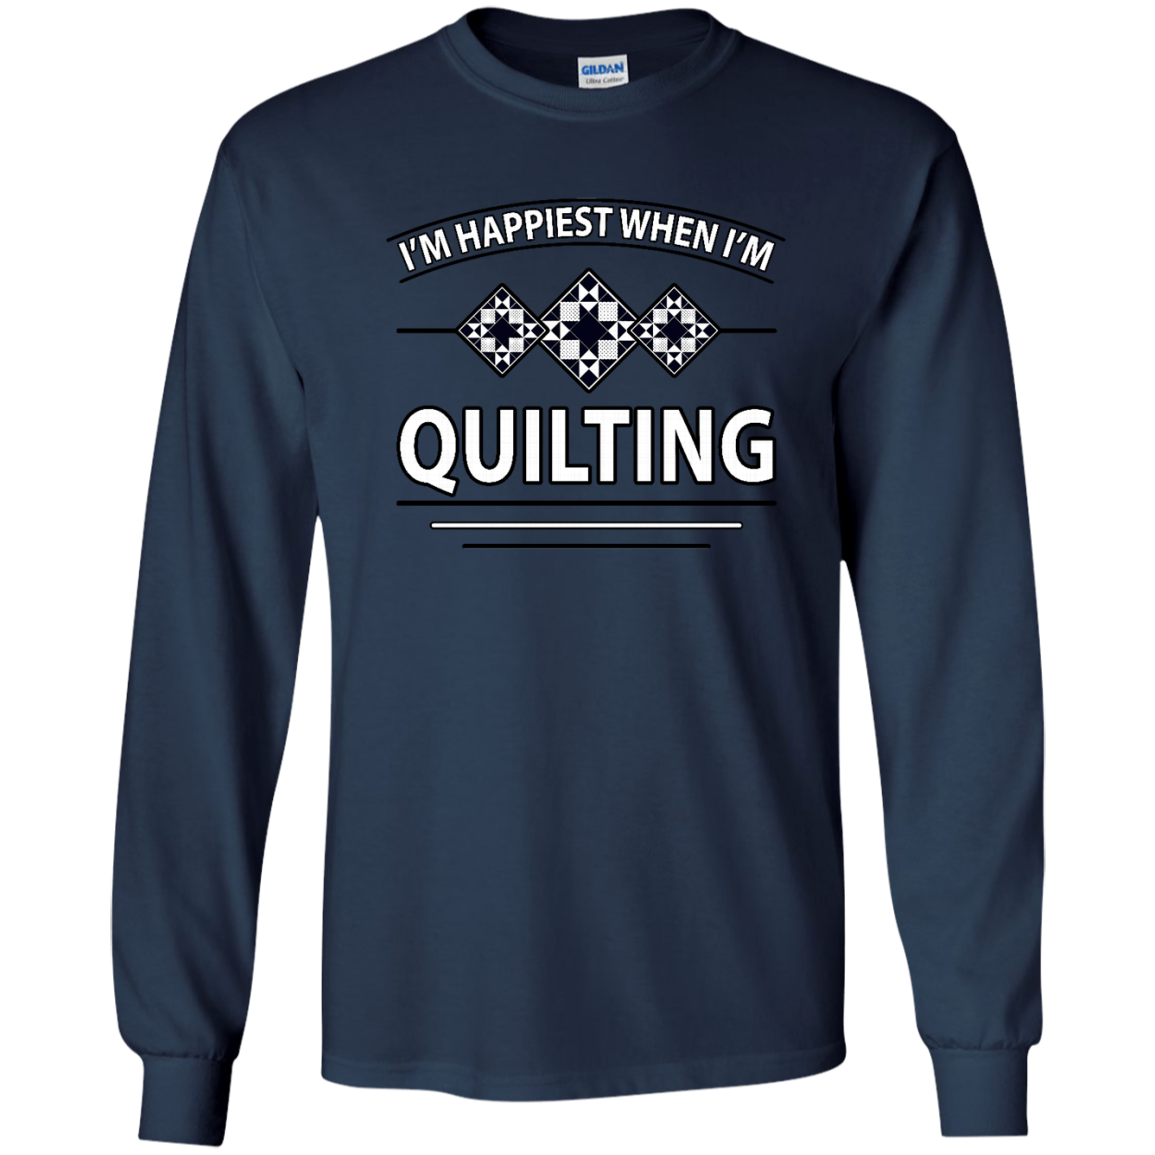 I'm Happiest When I'm Quilting LS Ultra Cotton T-Shirt